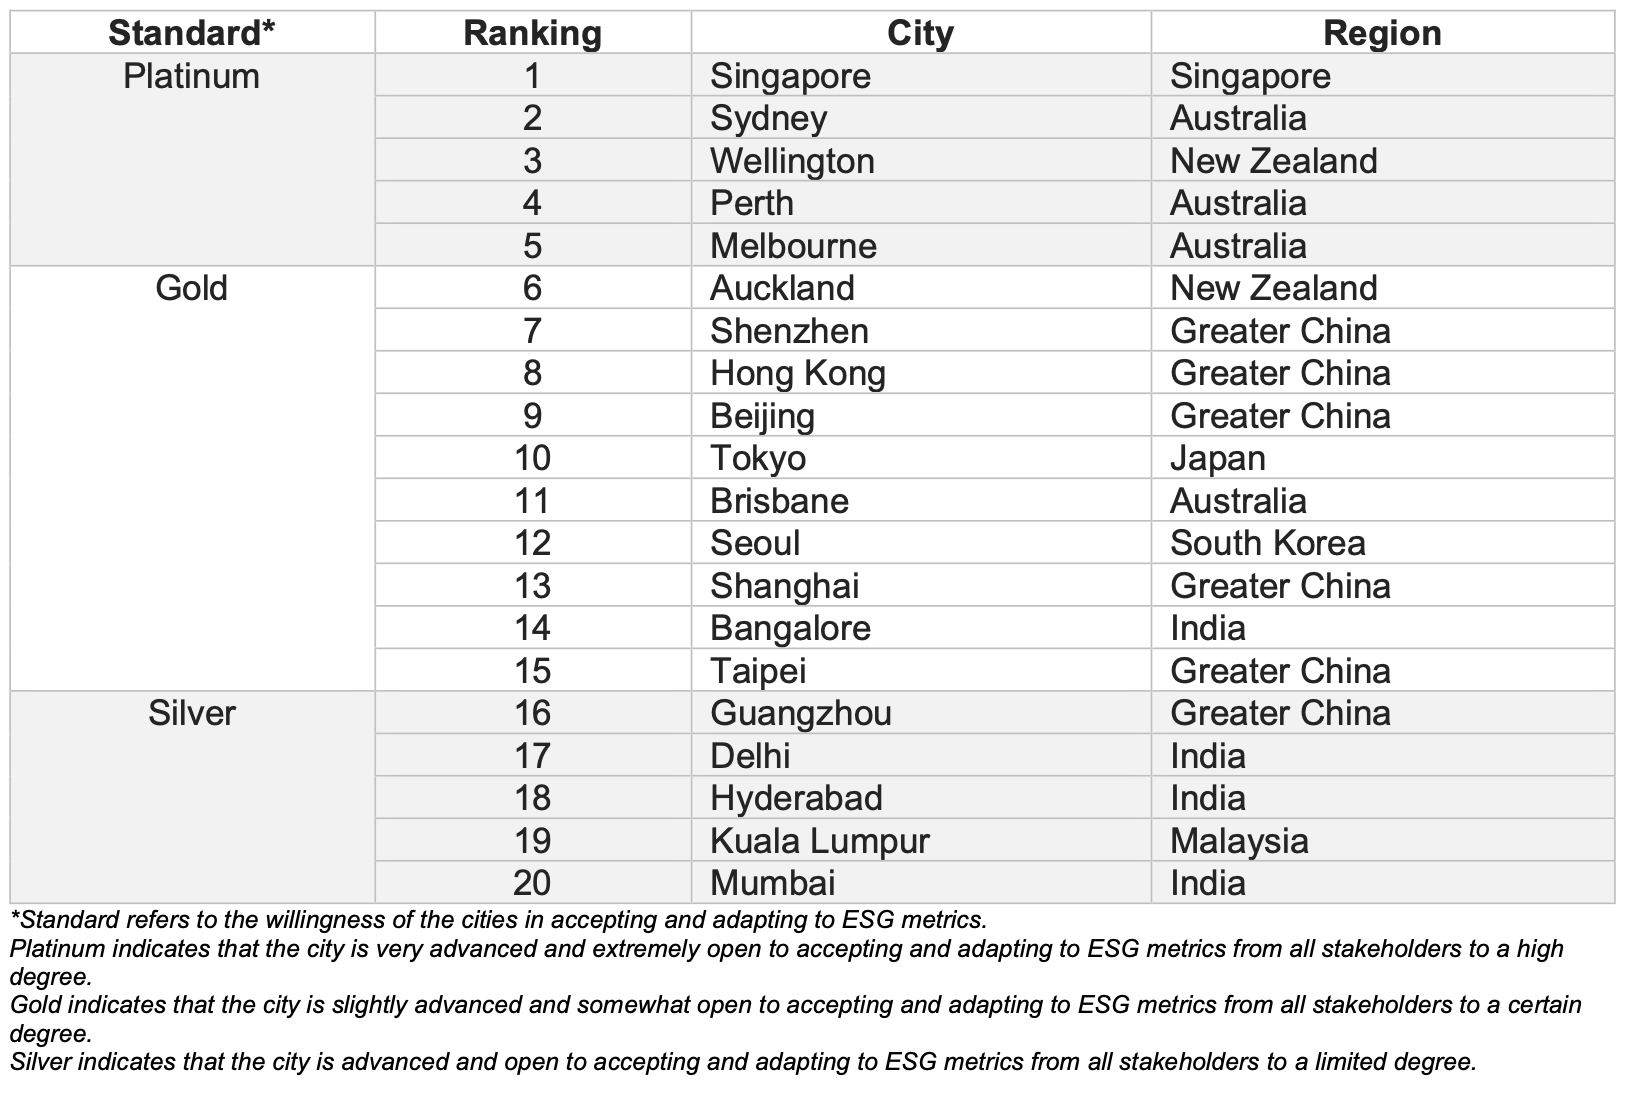 Singapore Topped the APAC Sustainability Index